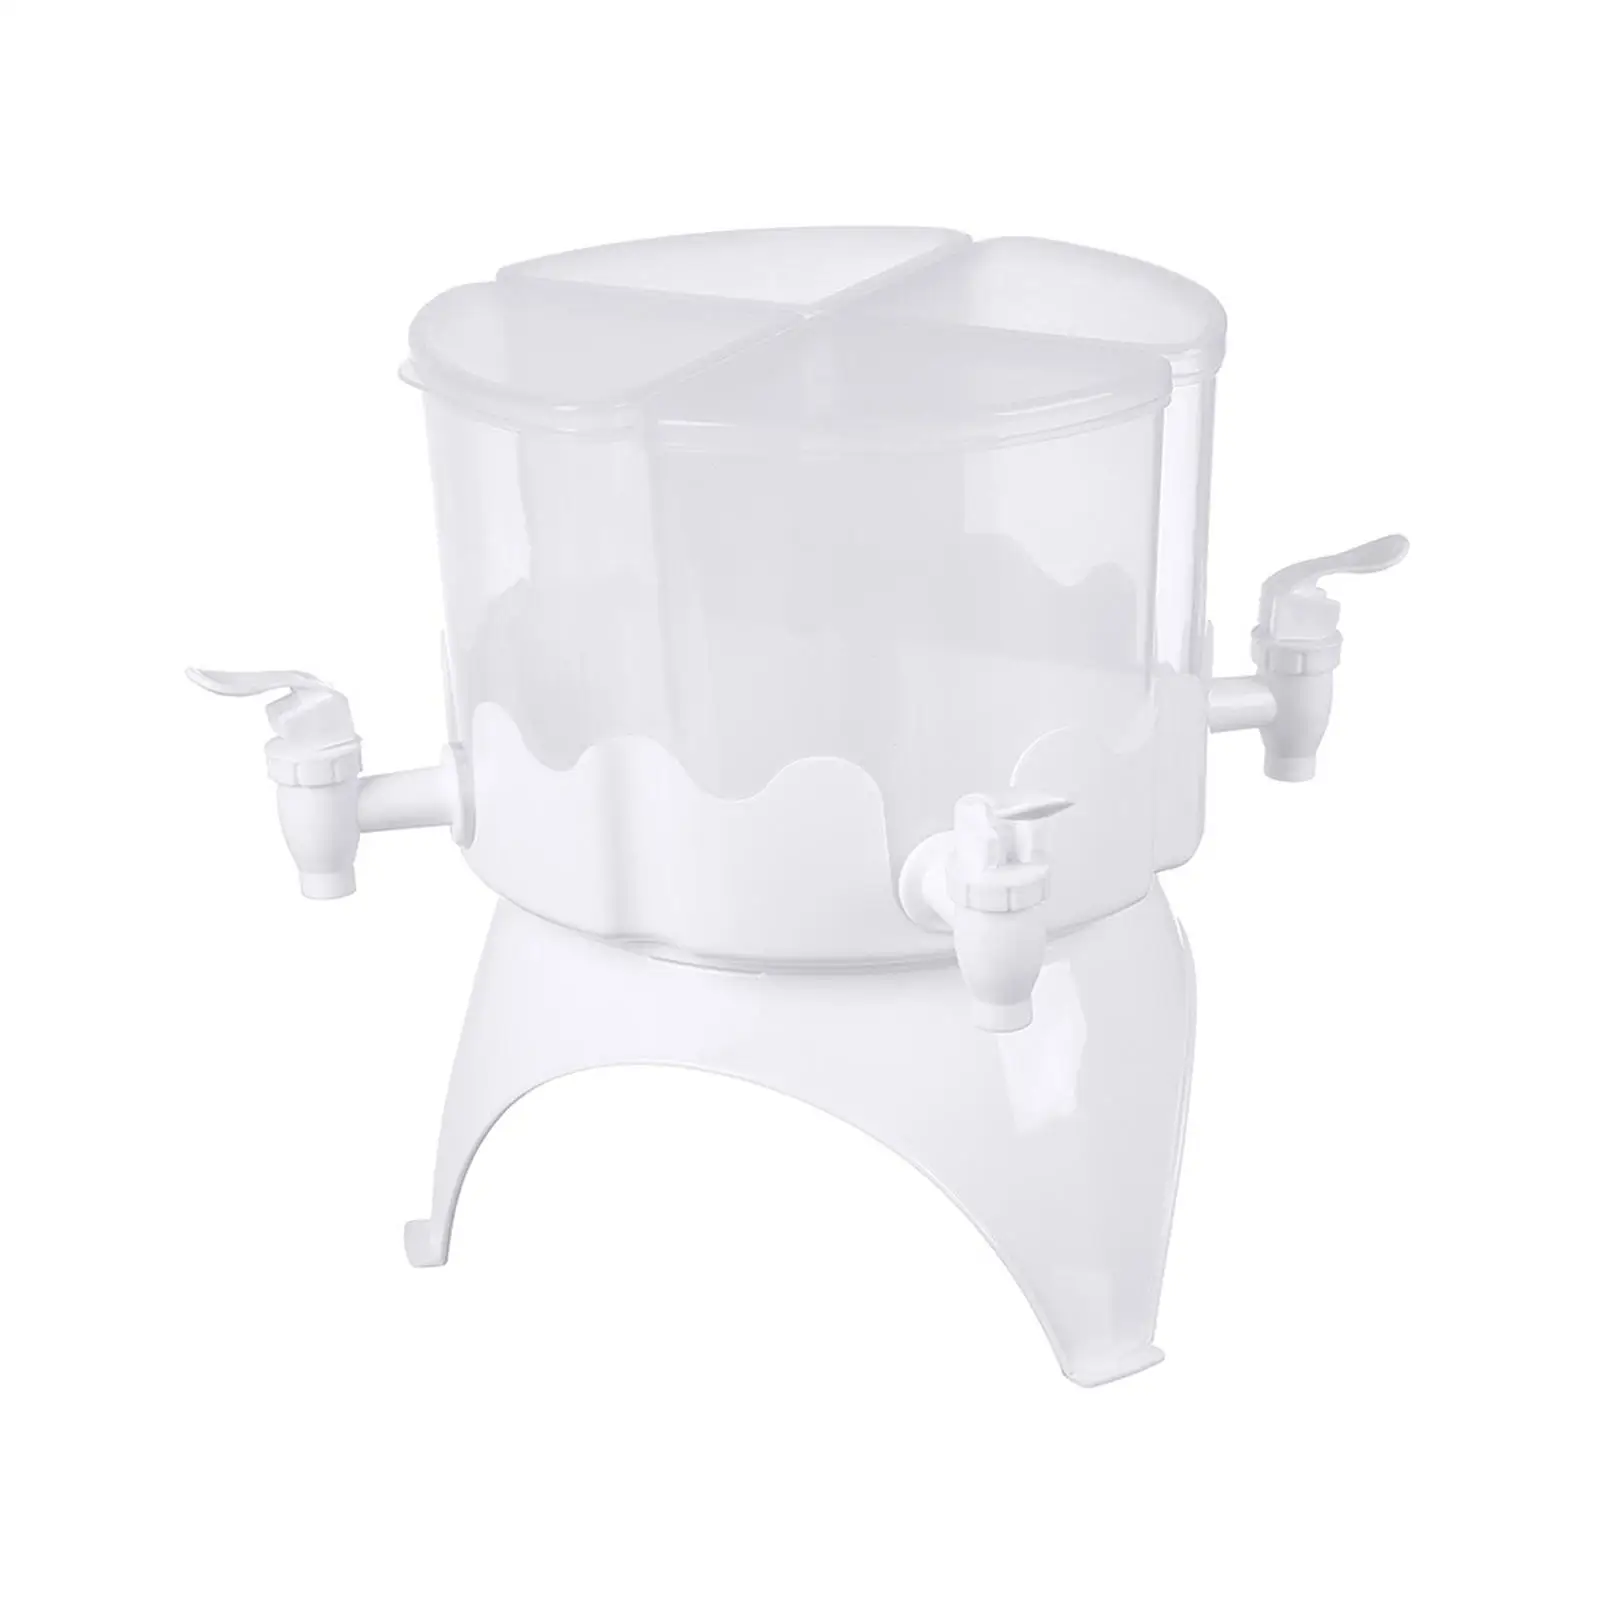 Refrigerator Cold Kettle Detachable Cold Water Jug Large Capacity 4L Juice Jug for Home Fridge Wedding Daily Use Outdoor Party